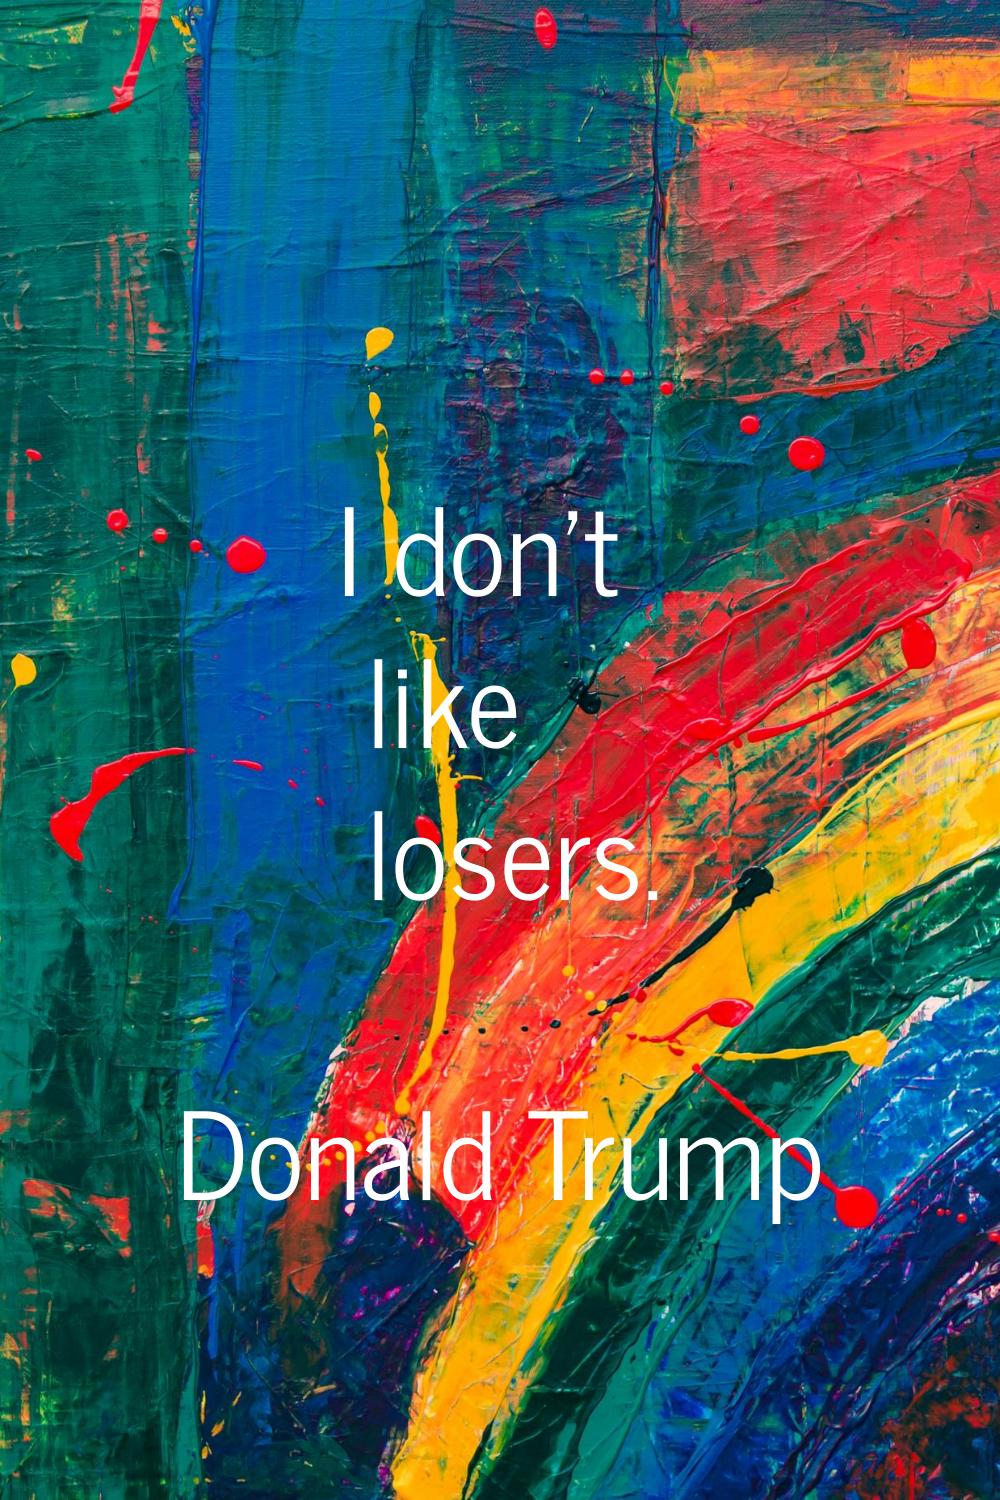 I don't like losers.